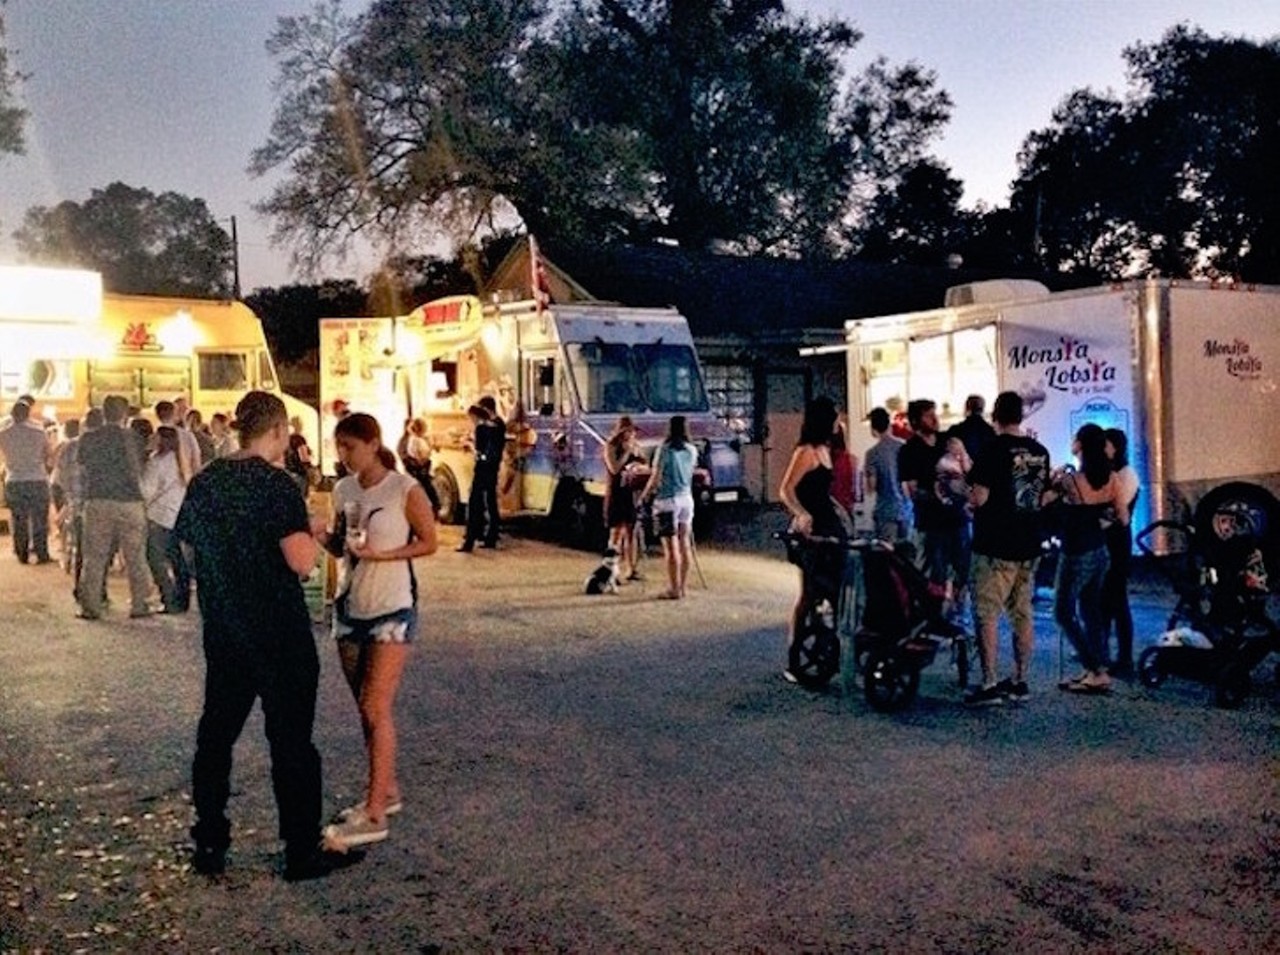 Take advantage of Orlando&#146;s food truck scene
Orlando&#146;s food trucks are one of the benefits of living in a foodie city. Hit up one of the Tasty Takeover events, where food trucks take over the parking lot behind the Milk District every Tuesday evening. If you&#146;re too overwhelmed by the options, track one of the city&#146;s moveable feasts by name, time, or location.
Photo via Tasty Takeover/Facebook